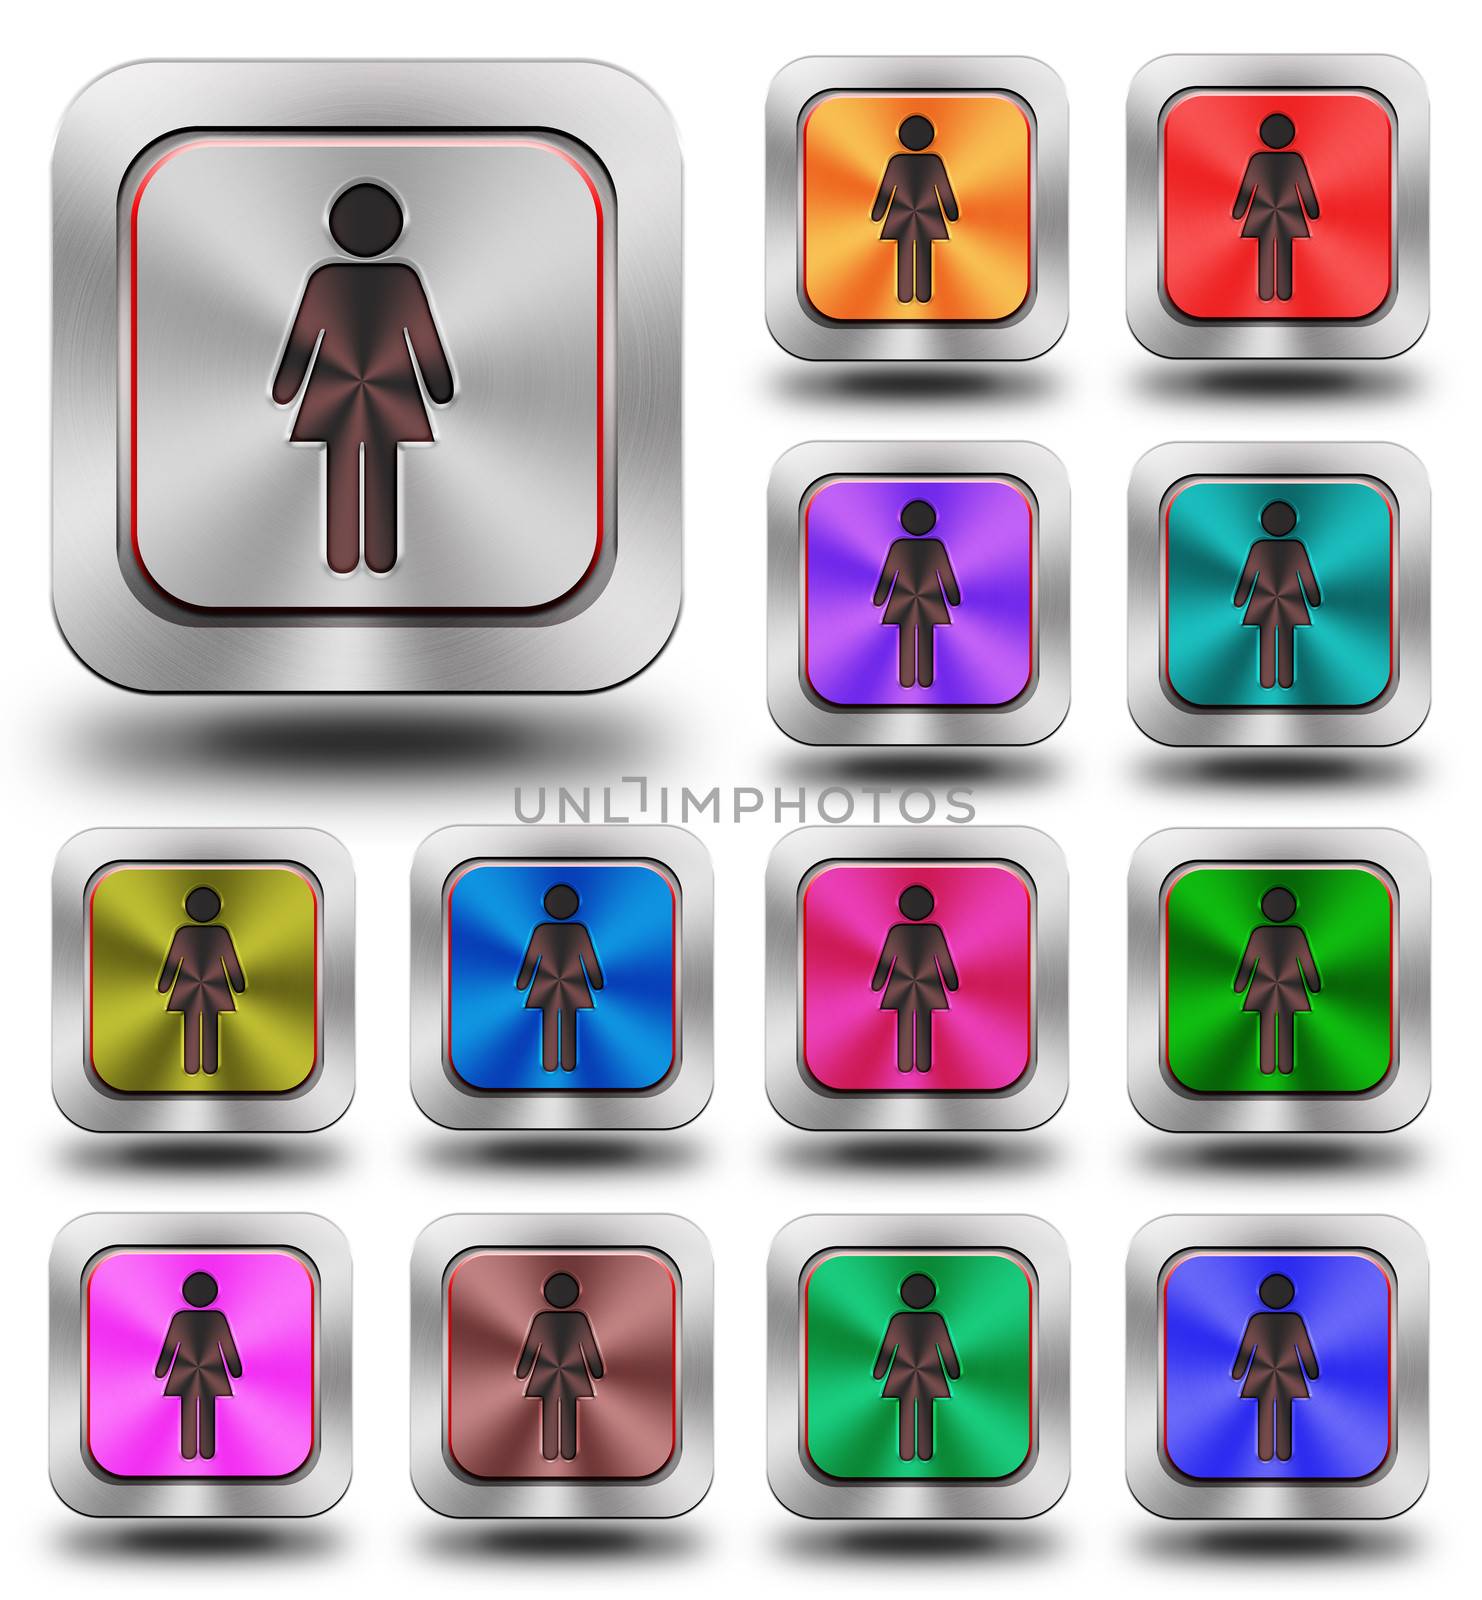 aluminum, steel, chromium, glossy, icon, button, sign, icons, buttons, crazy colors